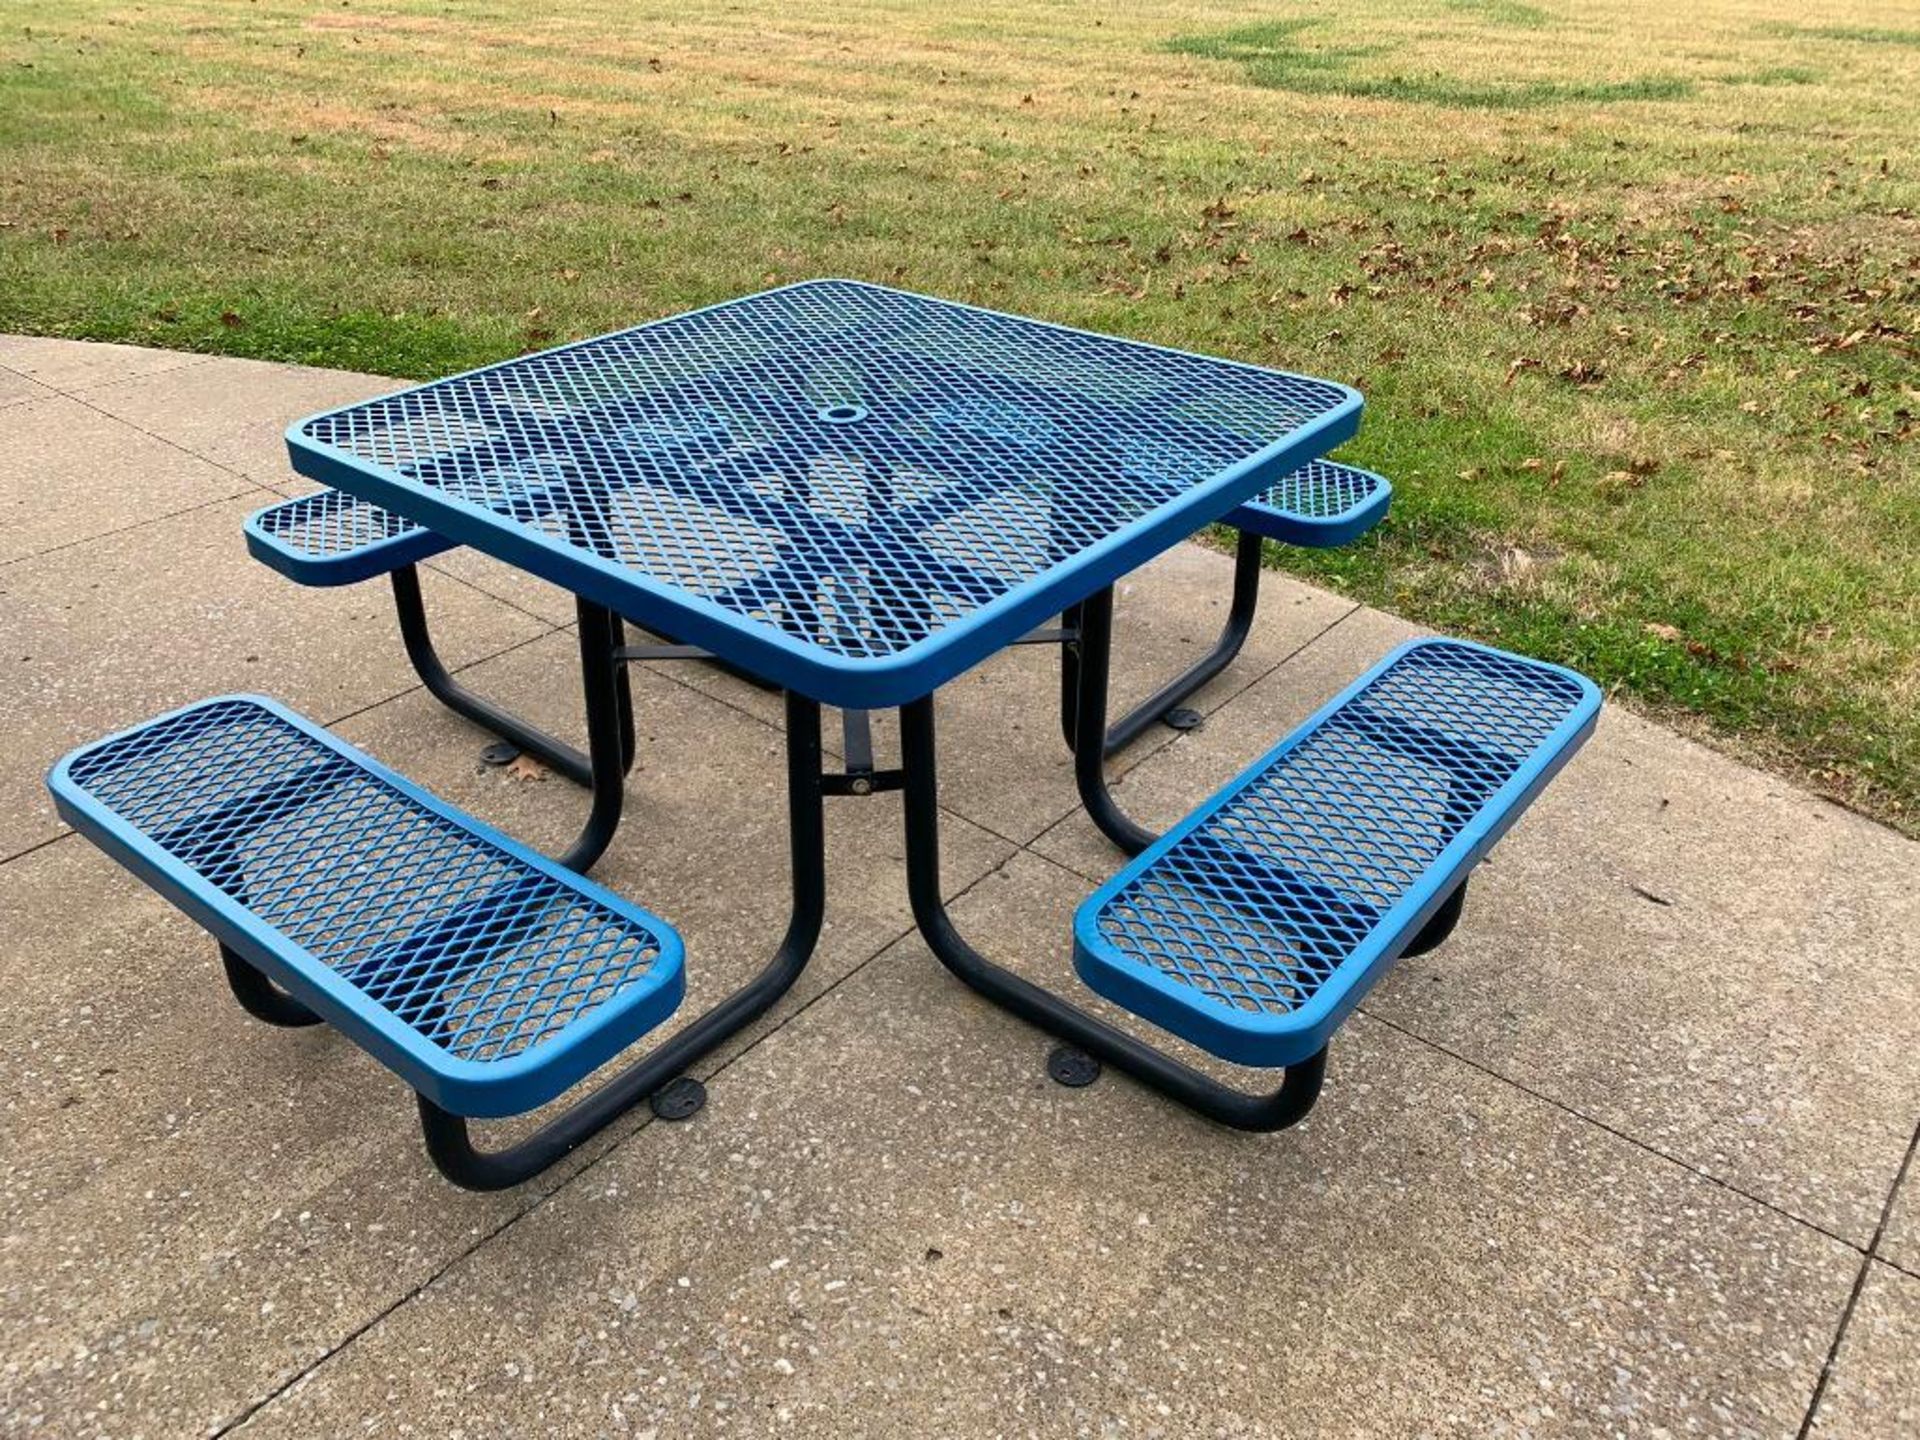 (8x) Global Square Outdoor Tables - Image 4 of 6